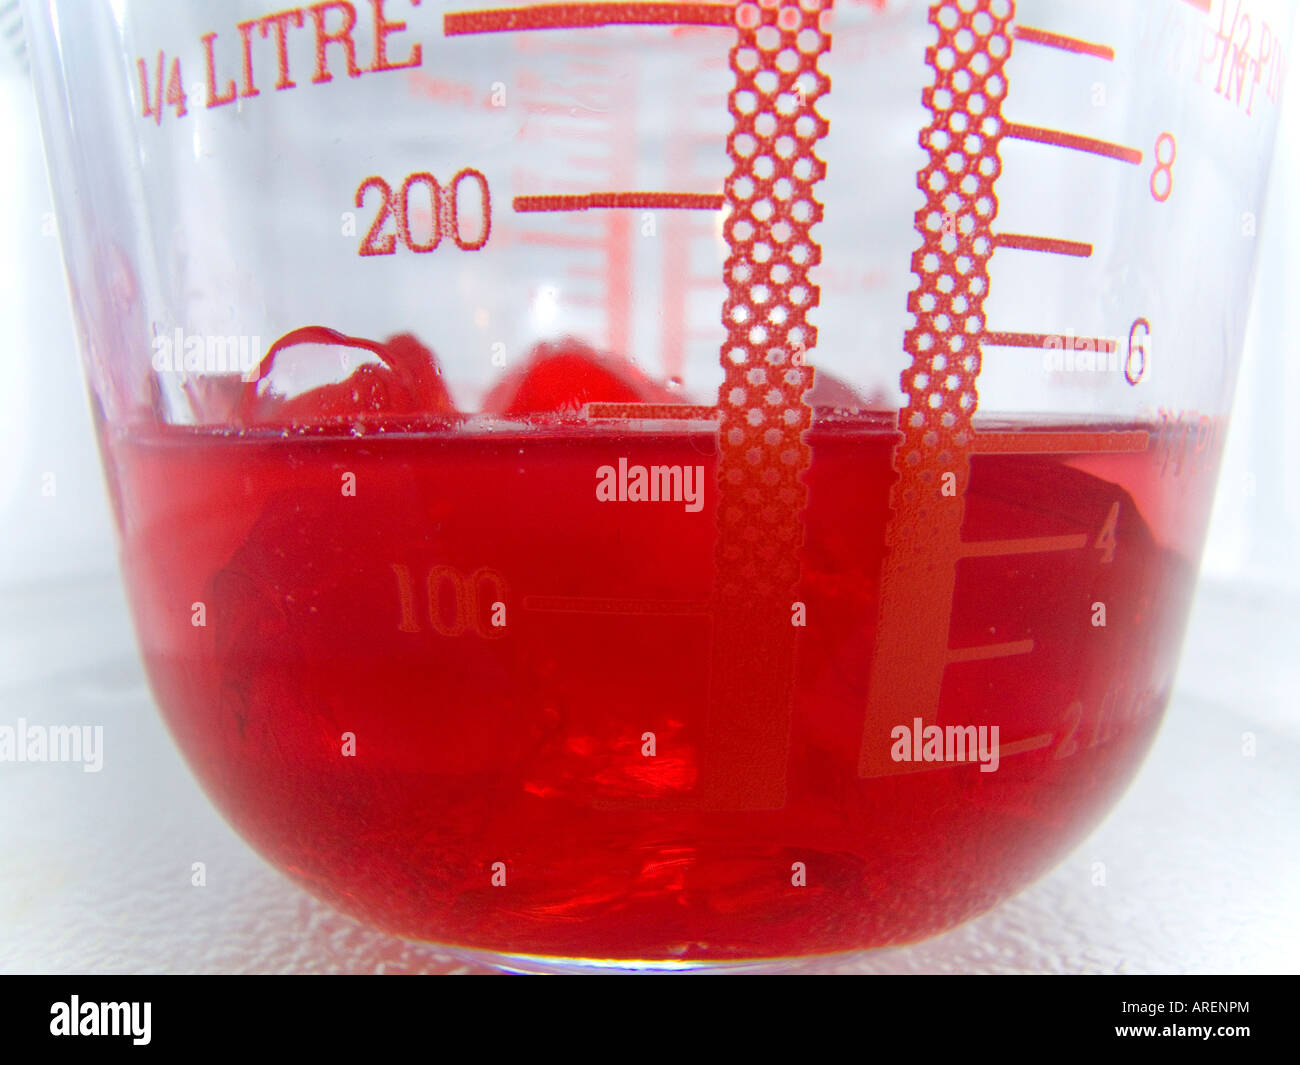 A block of red jelly dissolving Stock Photo